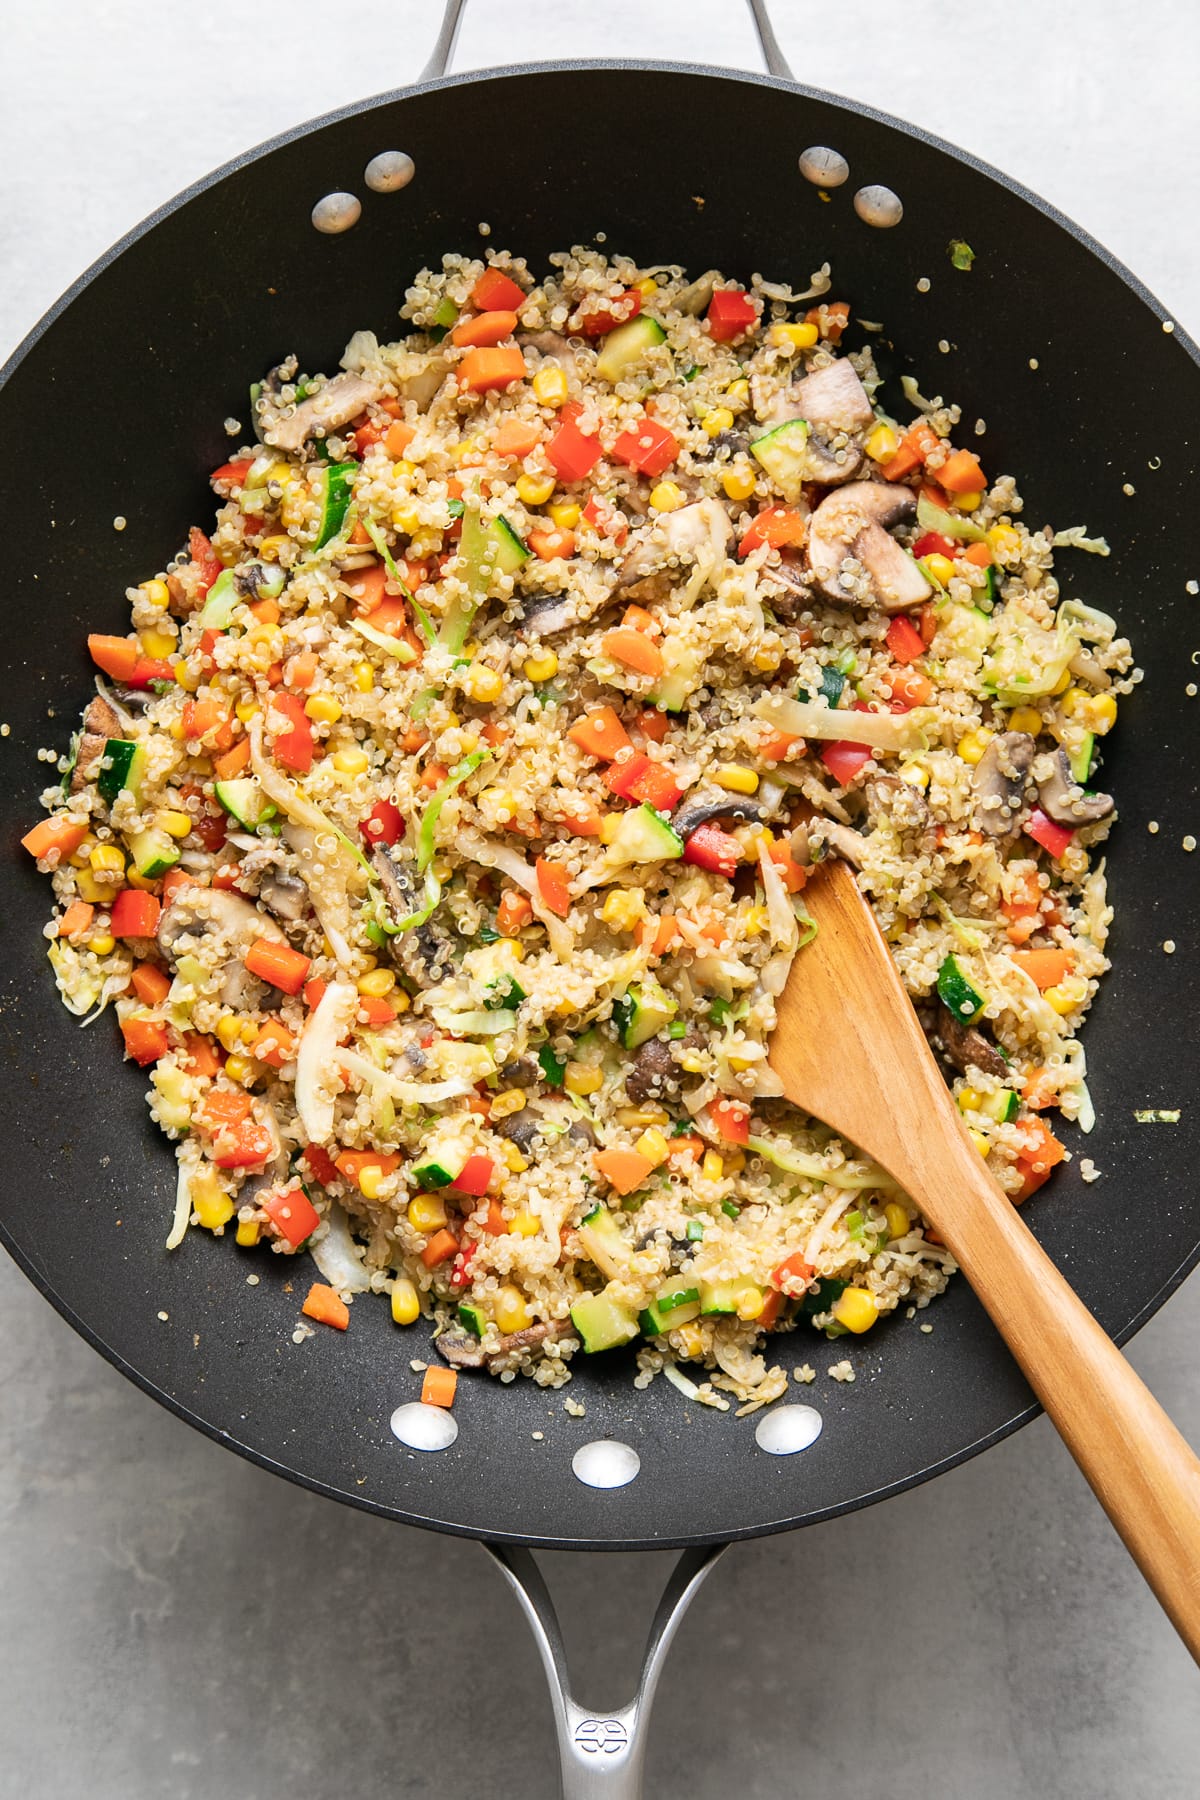 top down view of freshly made quinoa fried rice in a wok with wooden spoon.